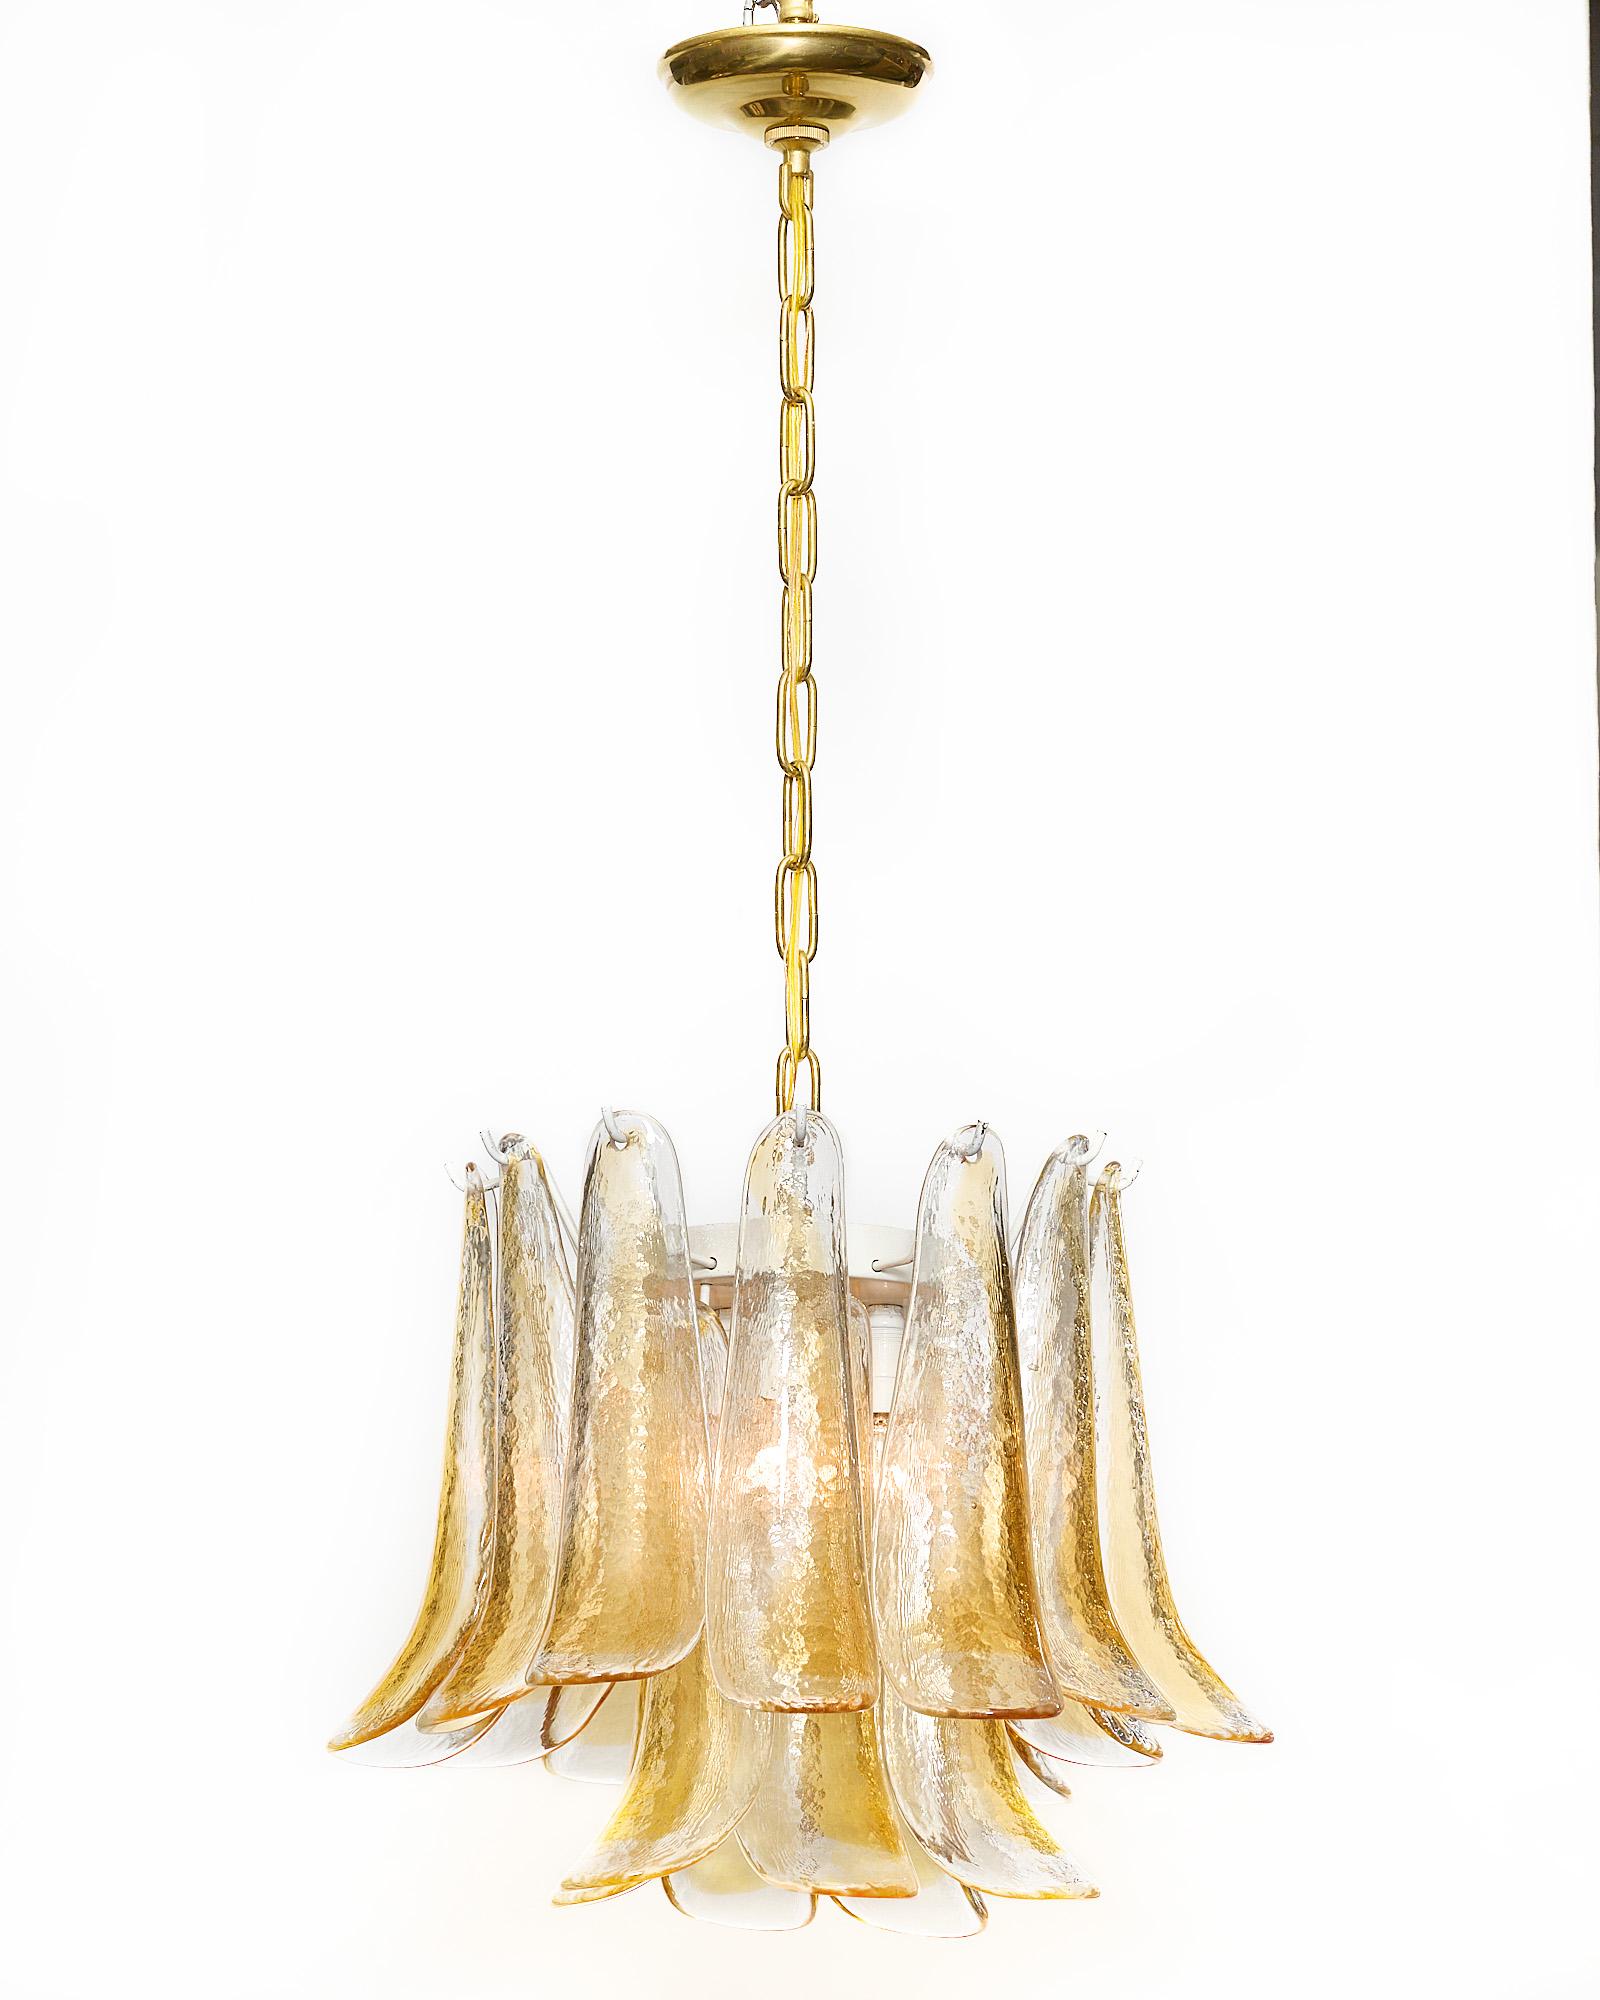 Chandelier, Italian, from the island of Murano. Each hand-blown glass component is in the “selle” or shoehorn shape with amber and textured clear glass. It has been newly wired to fit US standards.
Current height from ceiling is 36”.